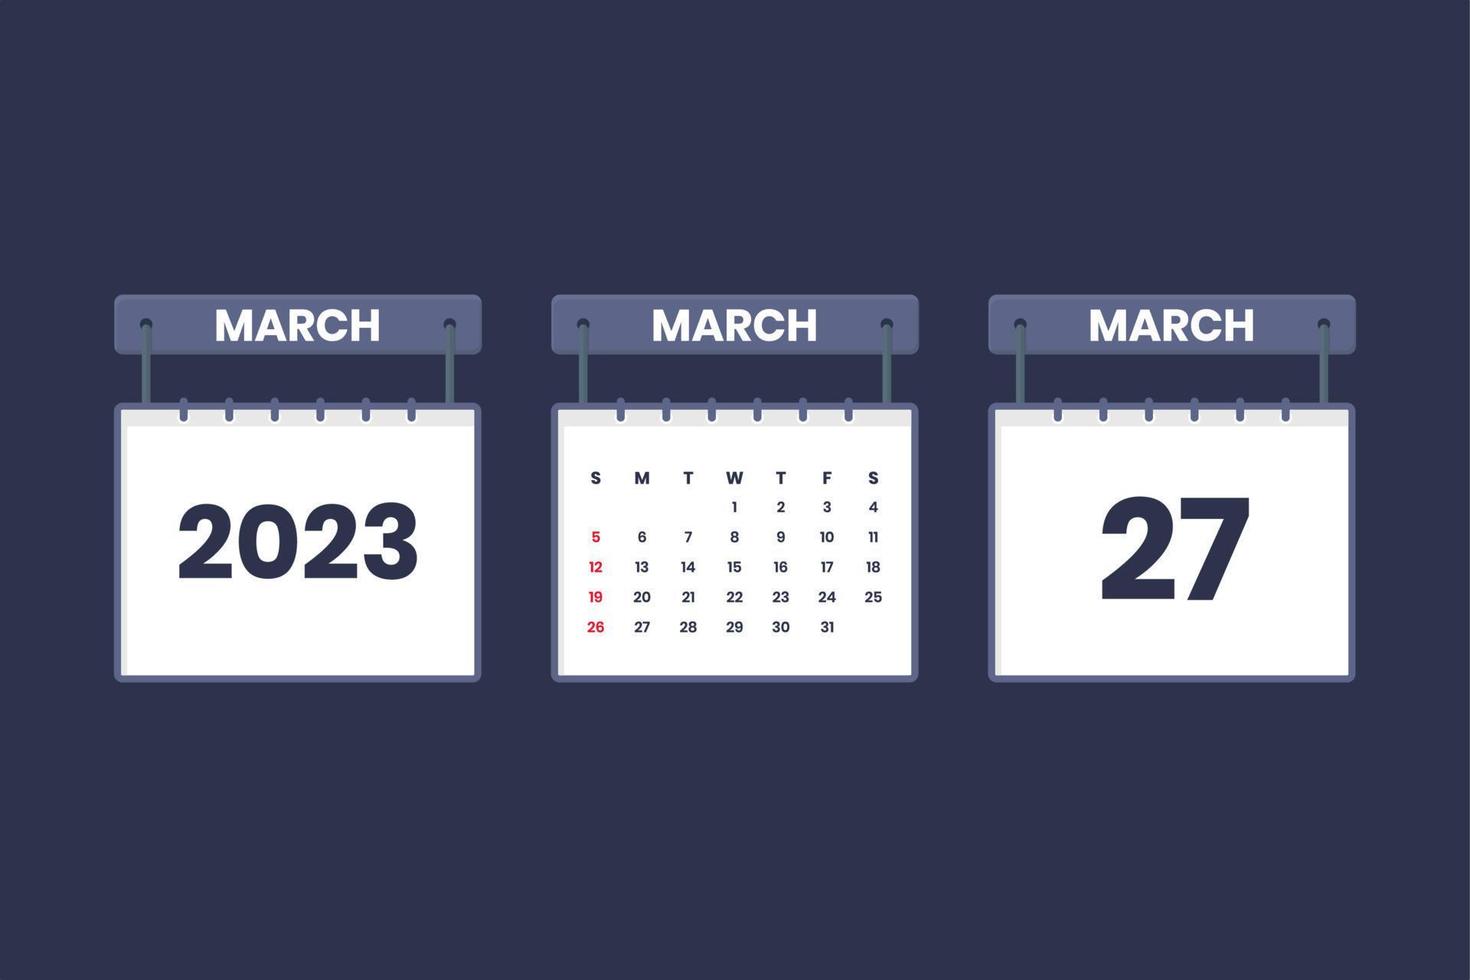 27 March 2023 calendar icon for schedule, appointment, important date concept vector